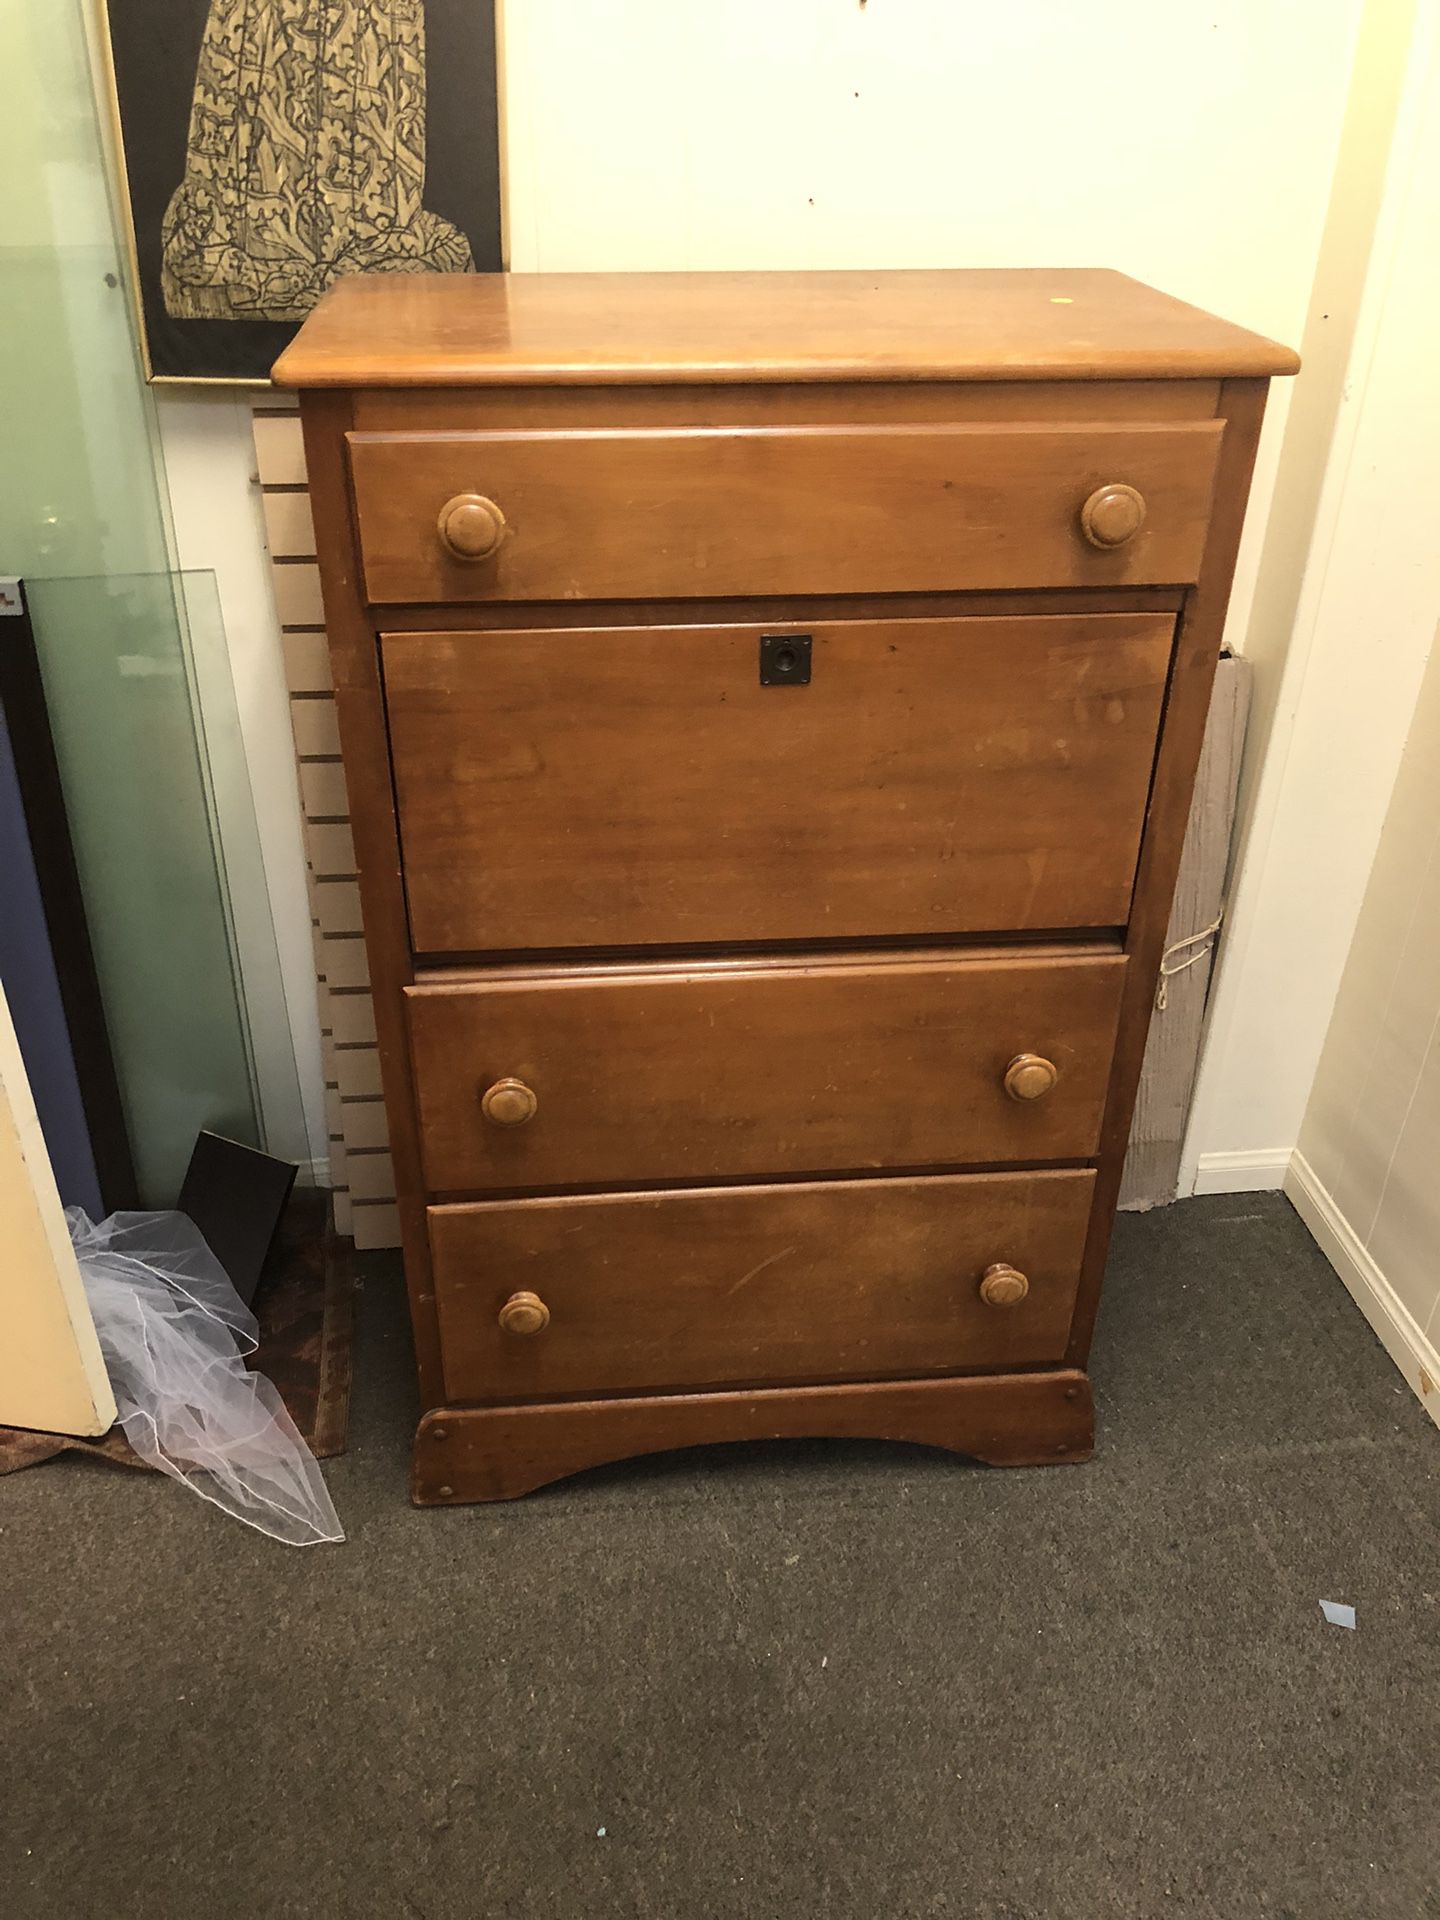 Very Old Dresser /Desk, Great For Small Apartment , Make Offer To Nonprofit For Autism Need Gone